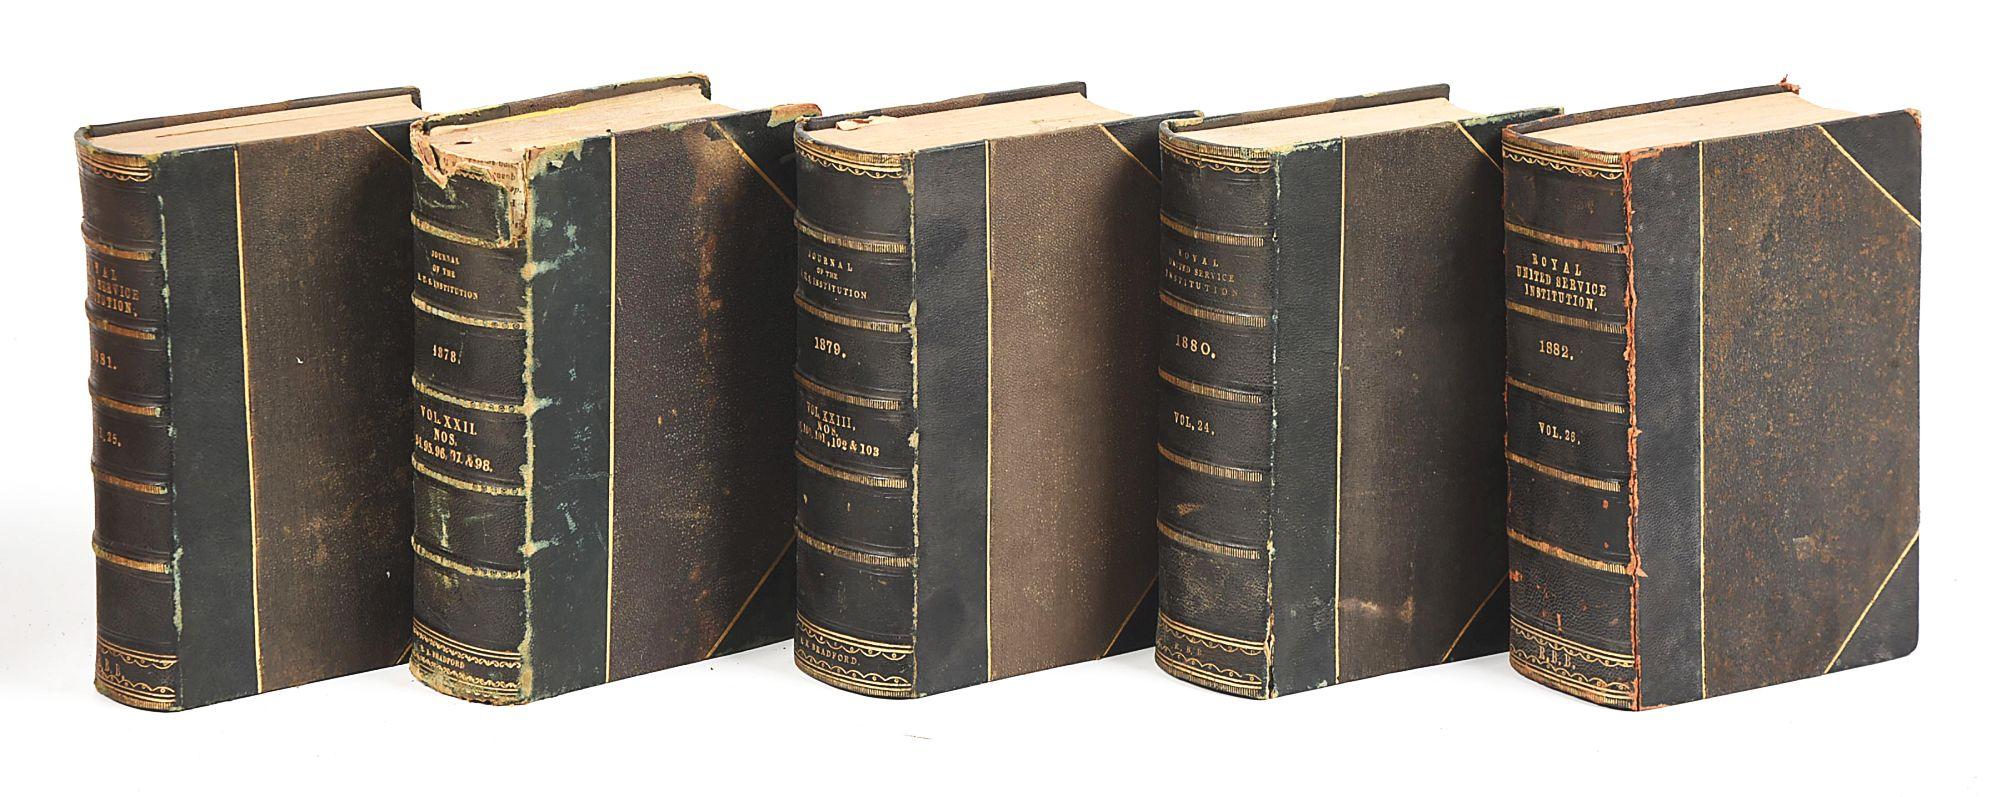 LOT OF 11: 19TH CENTURY VOLUMES OF THE JOURNAL OF THE ROYAL UNITED SERVICE INSTITUTE.